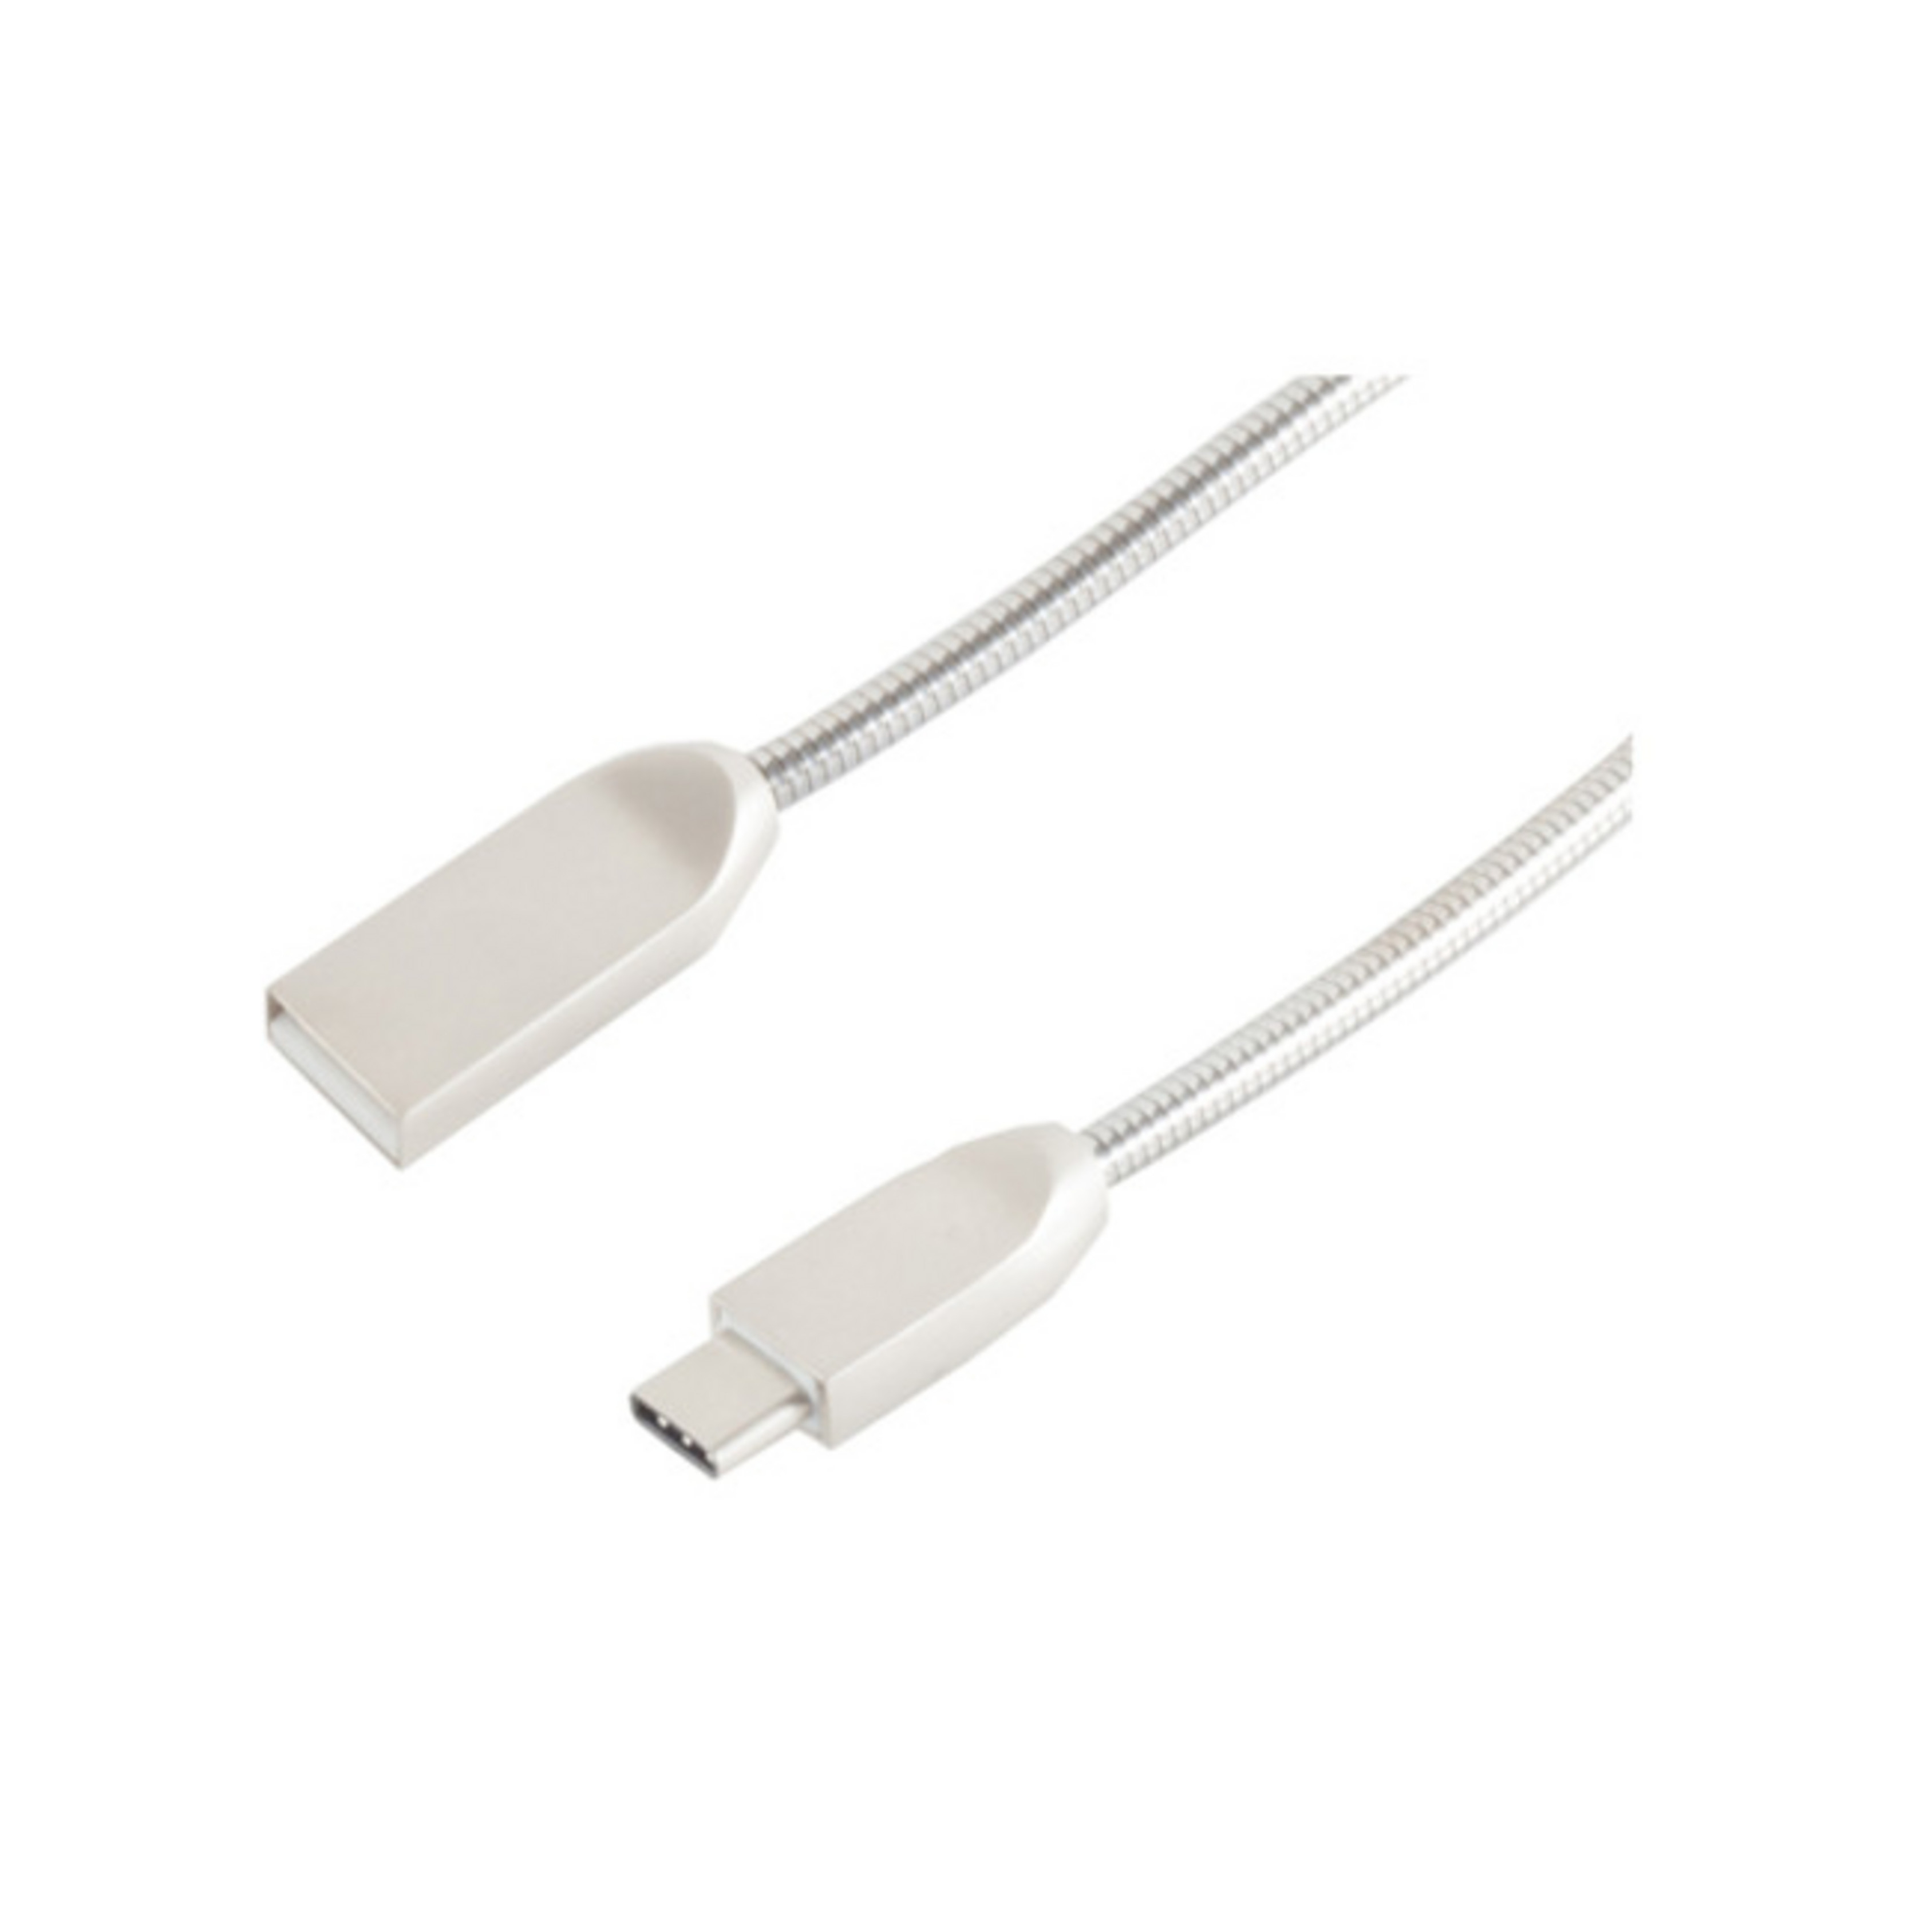 USB S/CONN 1,2m Kabel A/Type Silber USB Kabel Lade-Sync CONNECTIVITY MAXIMUM 3.1C Steel